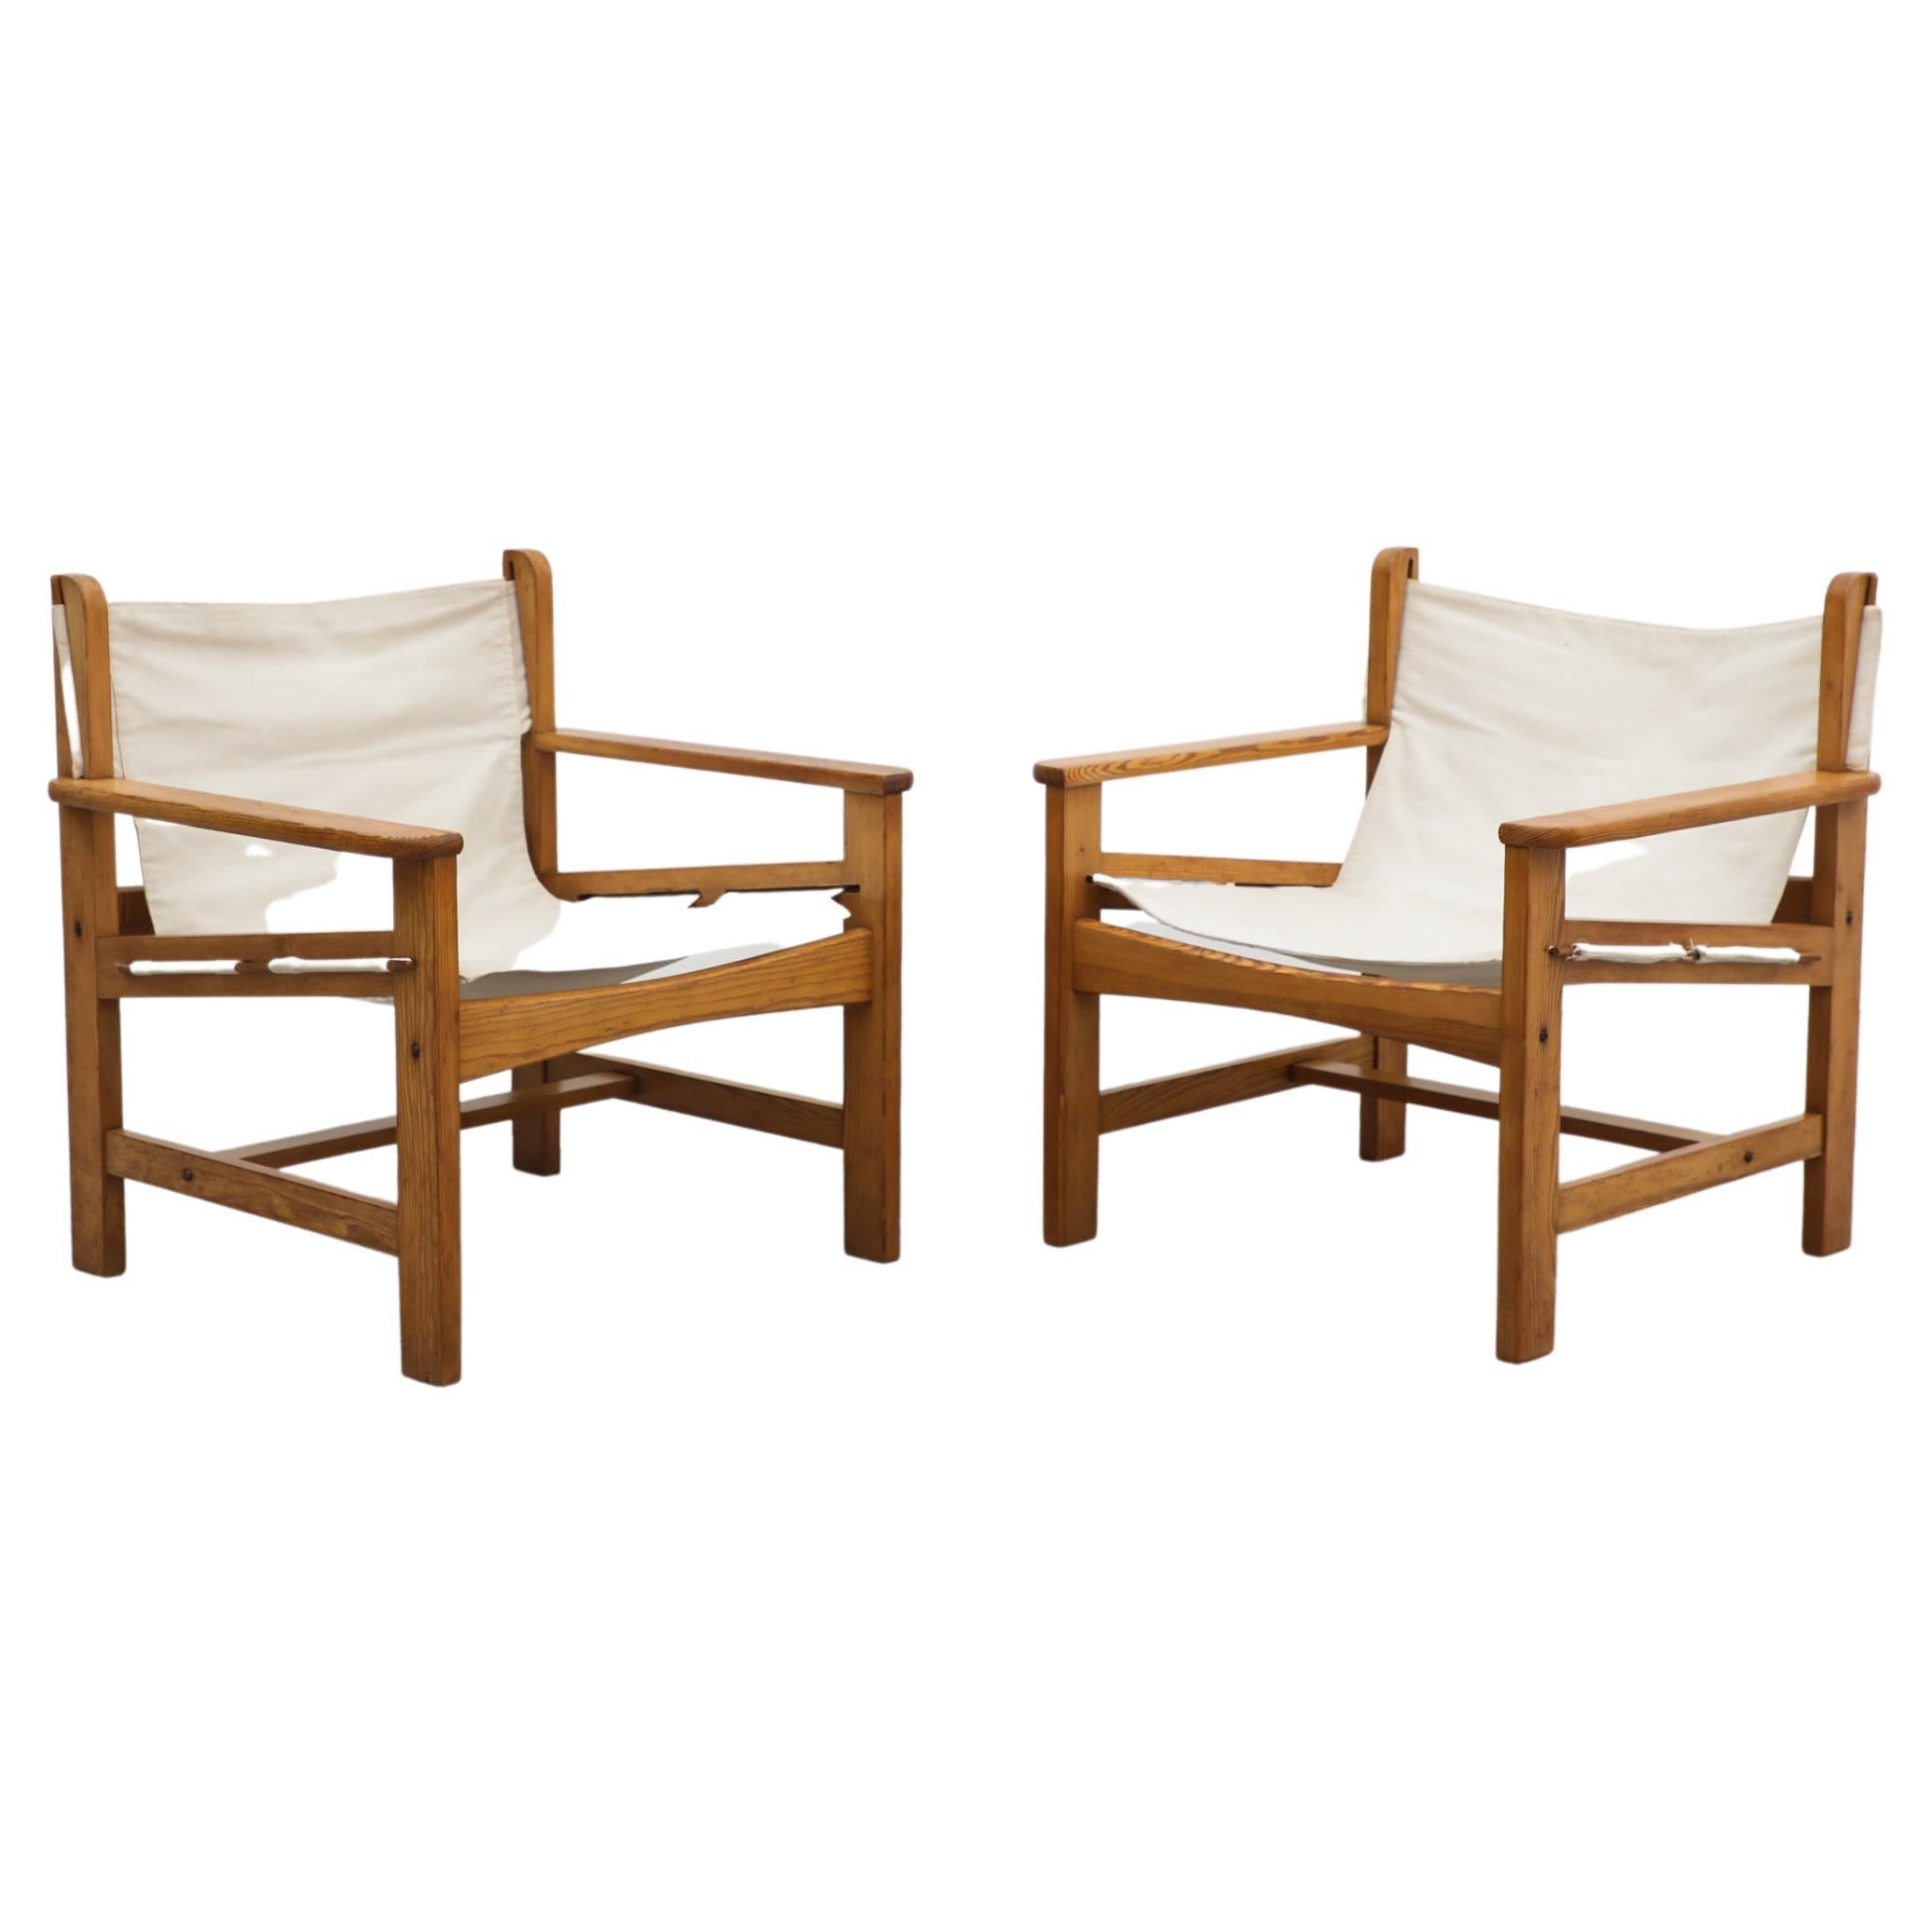 Pair of mid century Mogensen inspired safari chairs with pine frames and canvas sling seats. In original condition with visible wear consistent with their age and use. Set price.